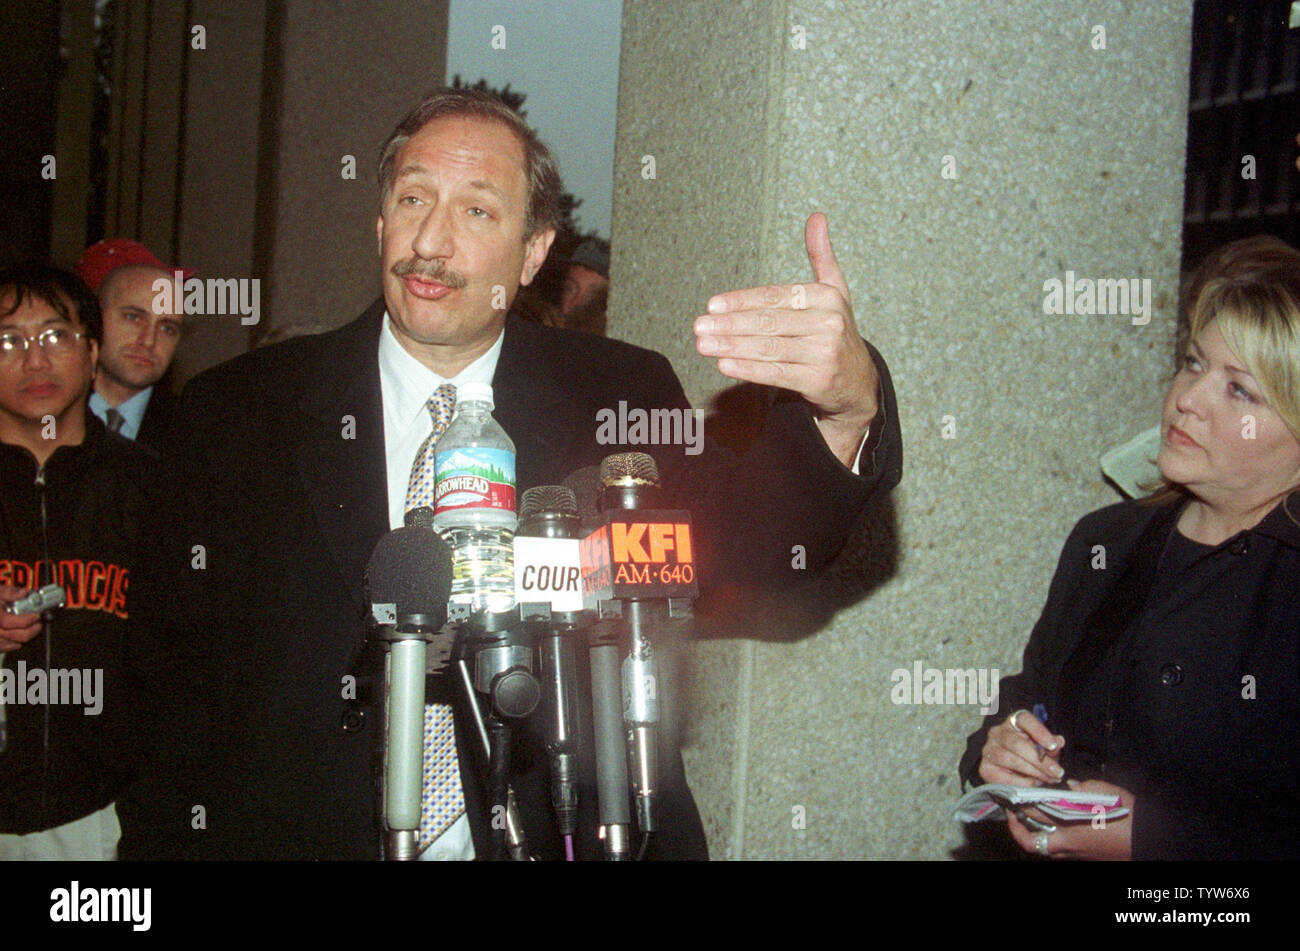 Defense attorney Mark Geragos speaks to the media after a hearing at the San Mateo County Courthouse in Redwood City, Calif., on February 2, 2004, for his client Scott Peterson, who is accused of the double murder of his wife Laci and their unborn son. Geragos obtained a week's delay to the start of the trial because of scheduling conflicts. (UPI Photo/David Yee) Stock Photo